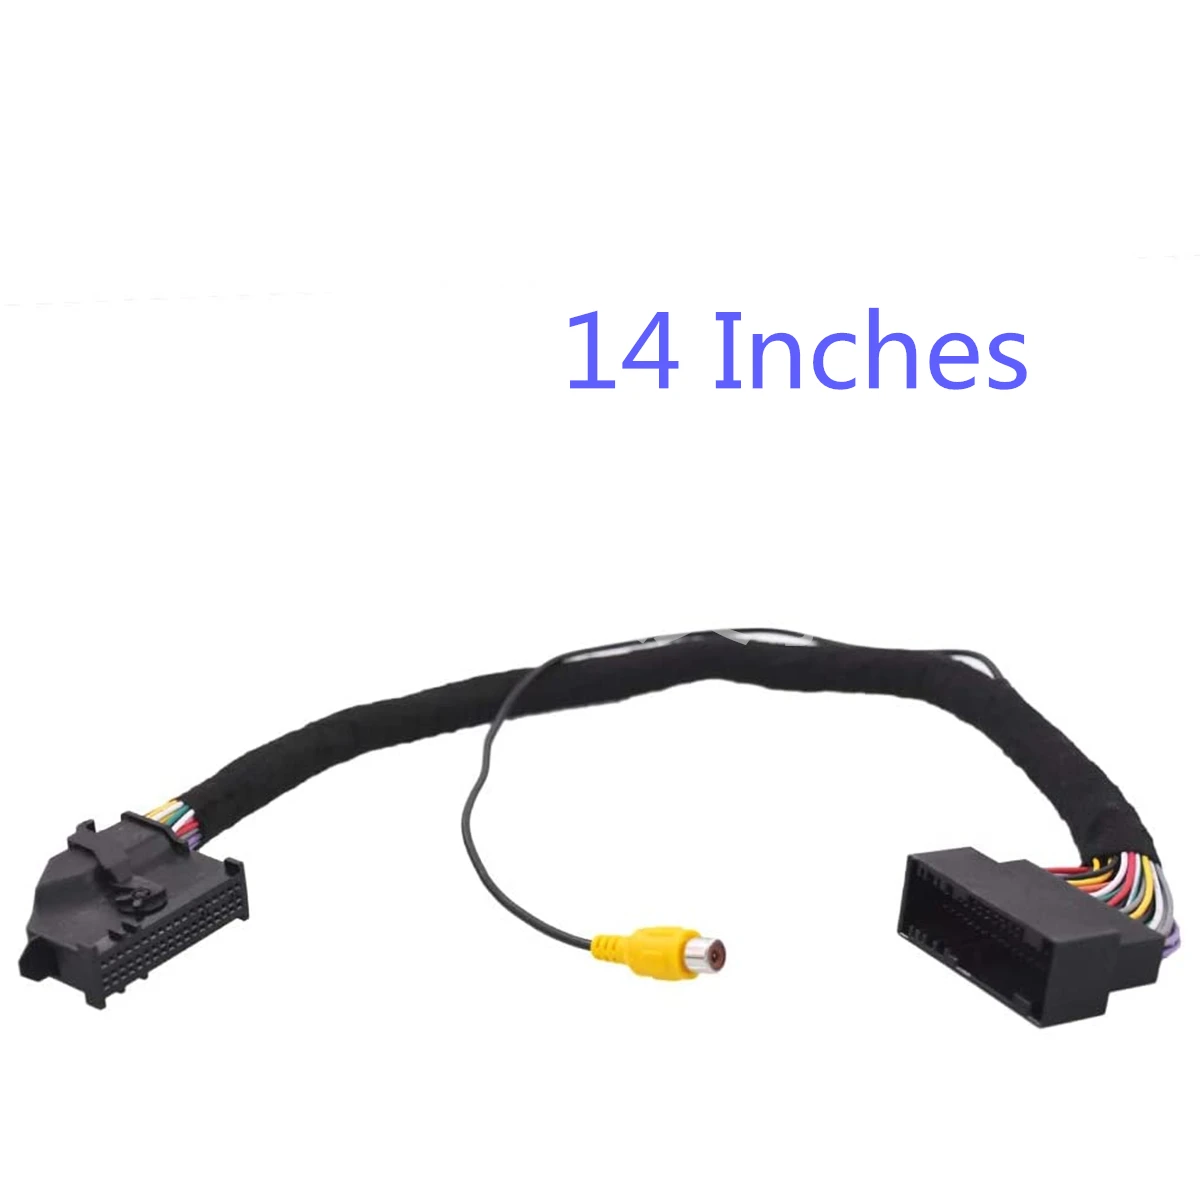 

54 Pin Apim Connector Sync 1 Ford-Car Camera Input Harness Cable Extension Cable on SYNC 2 or SYNC 3 with RCA